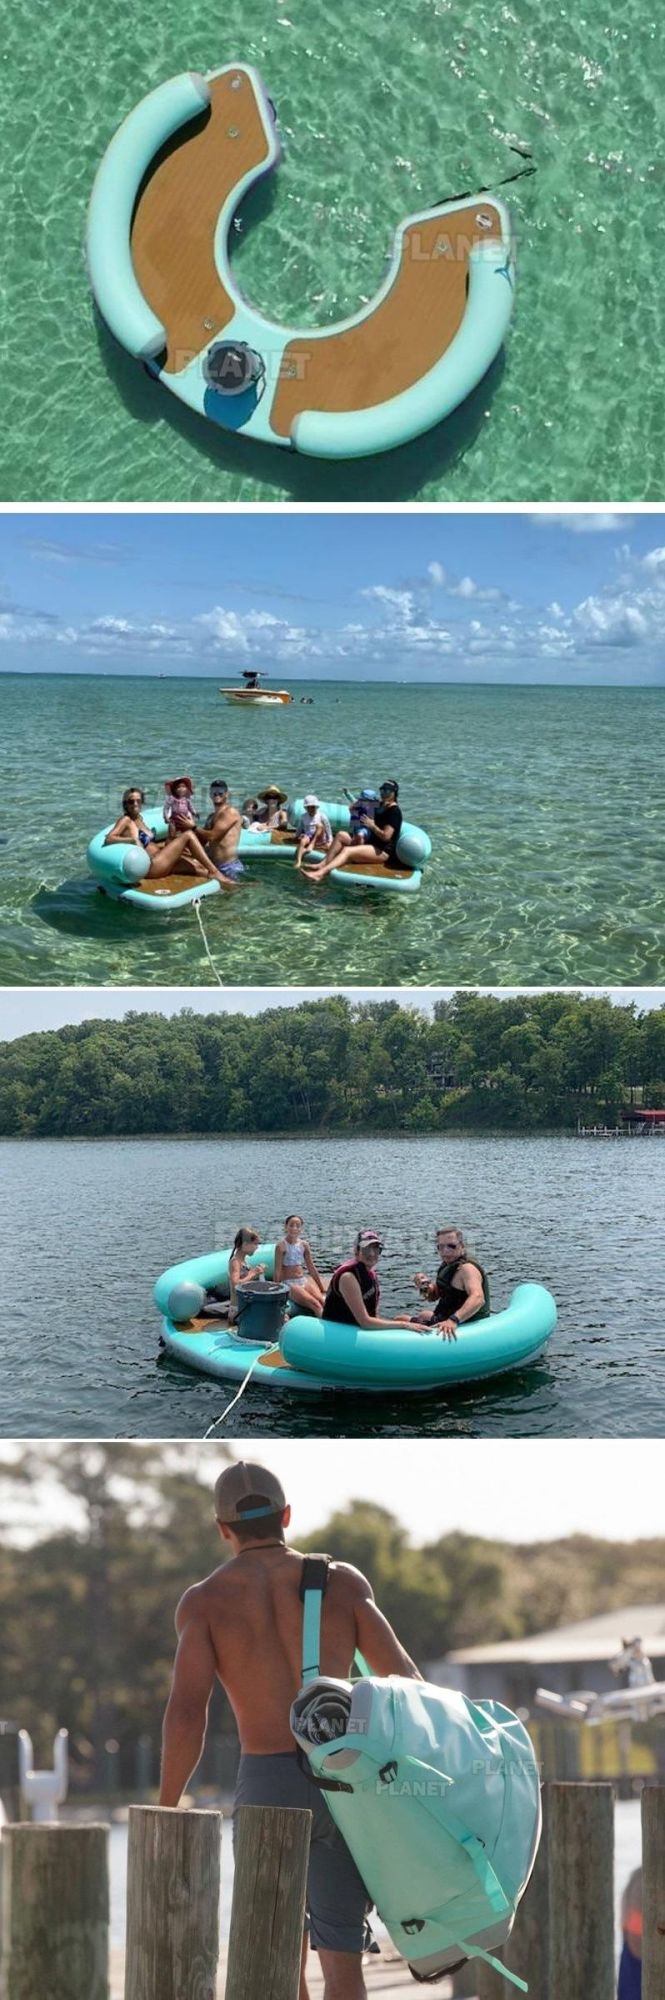 Hot Sale Summer Water Games Inflatable Floating Island Platform Bed Floating U Dock Inflatable Lounge Chair/Sofa